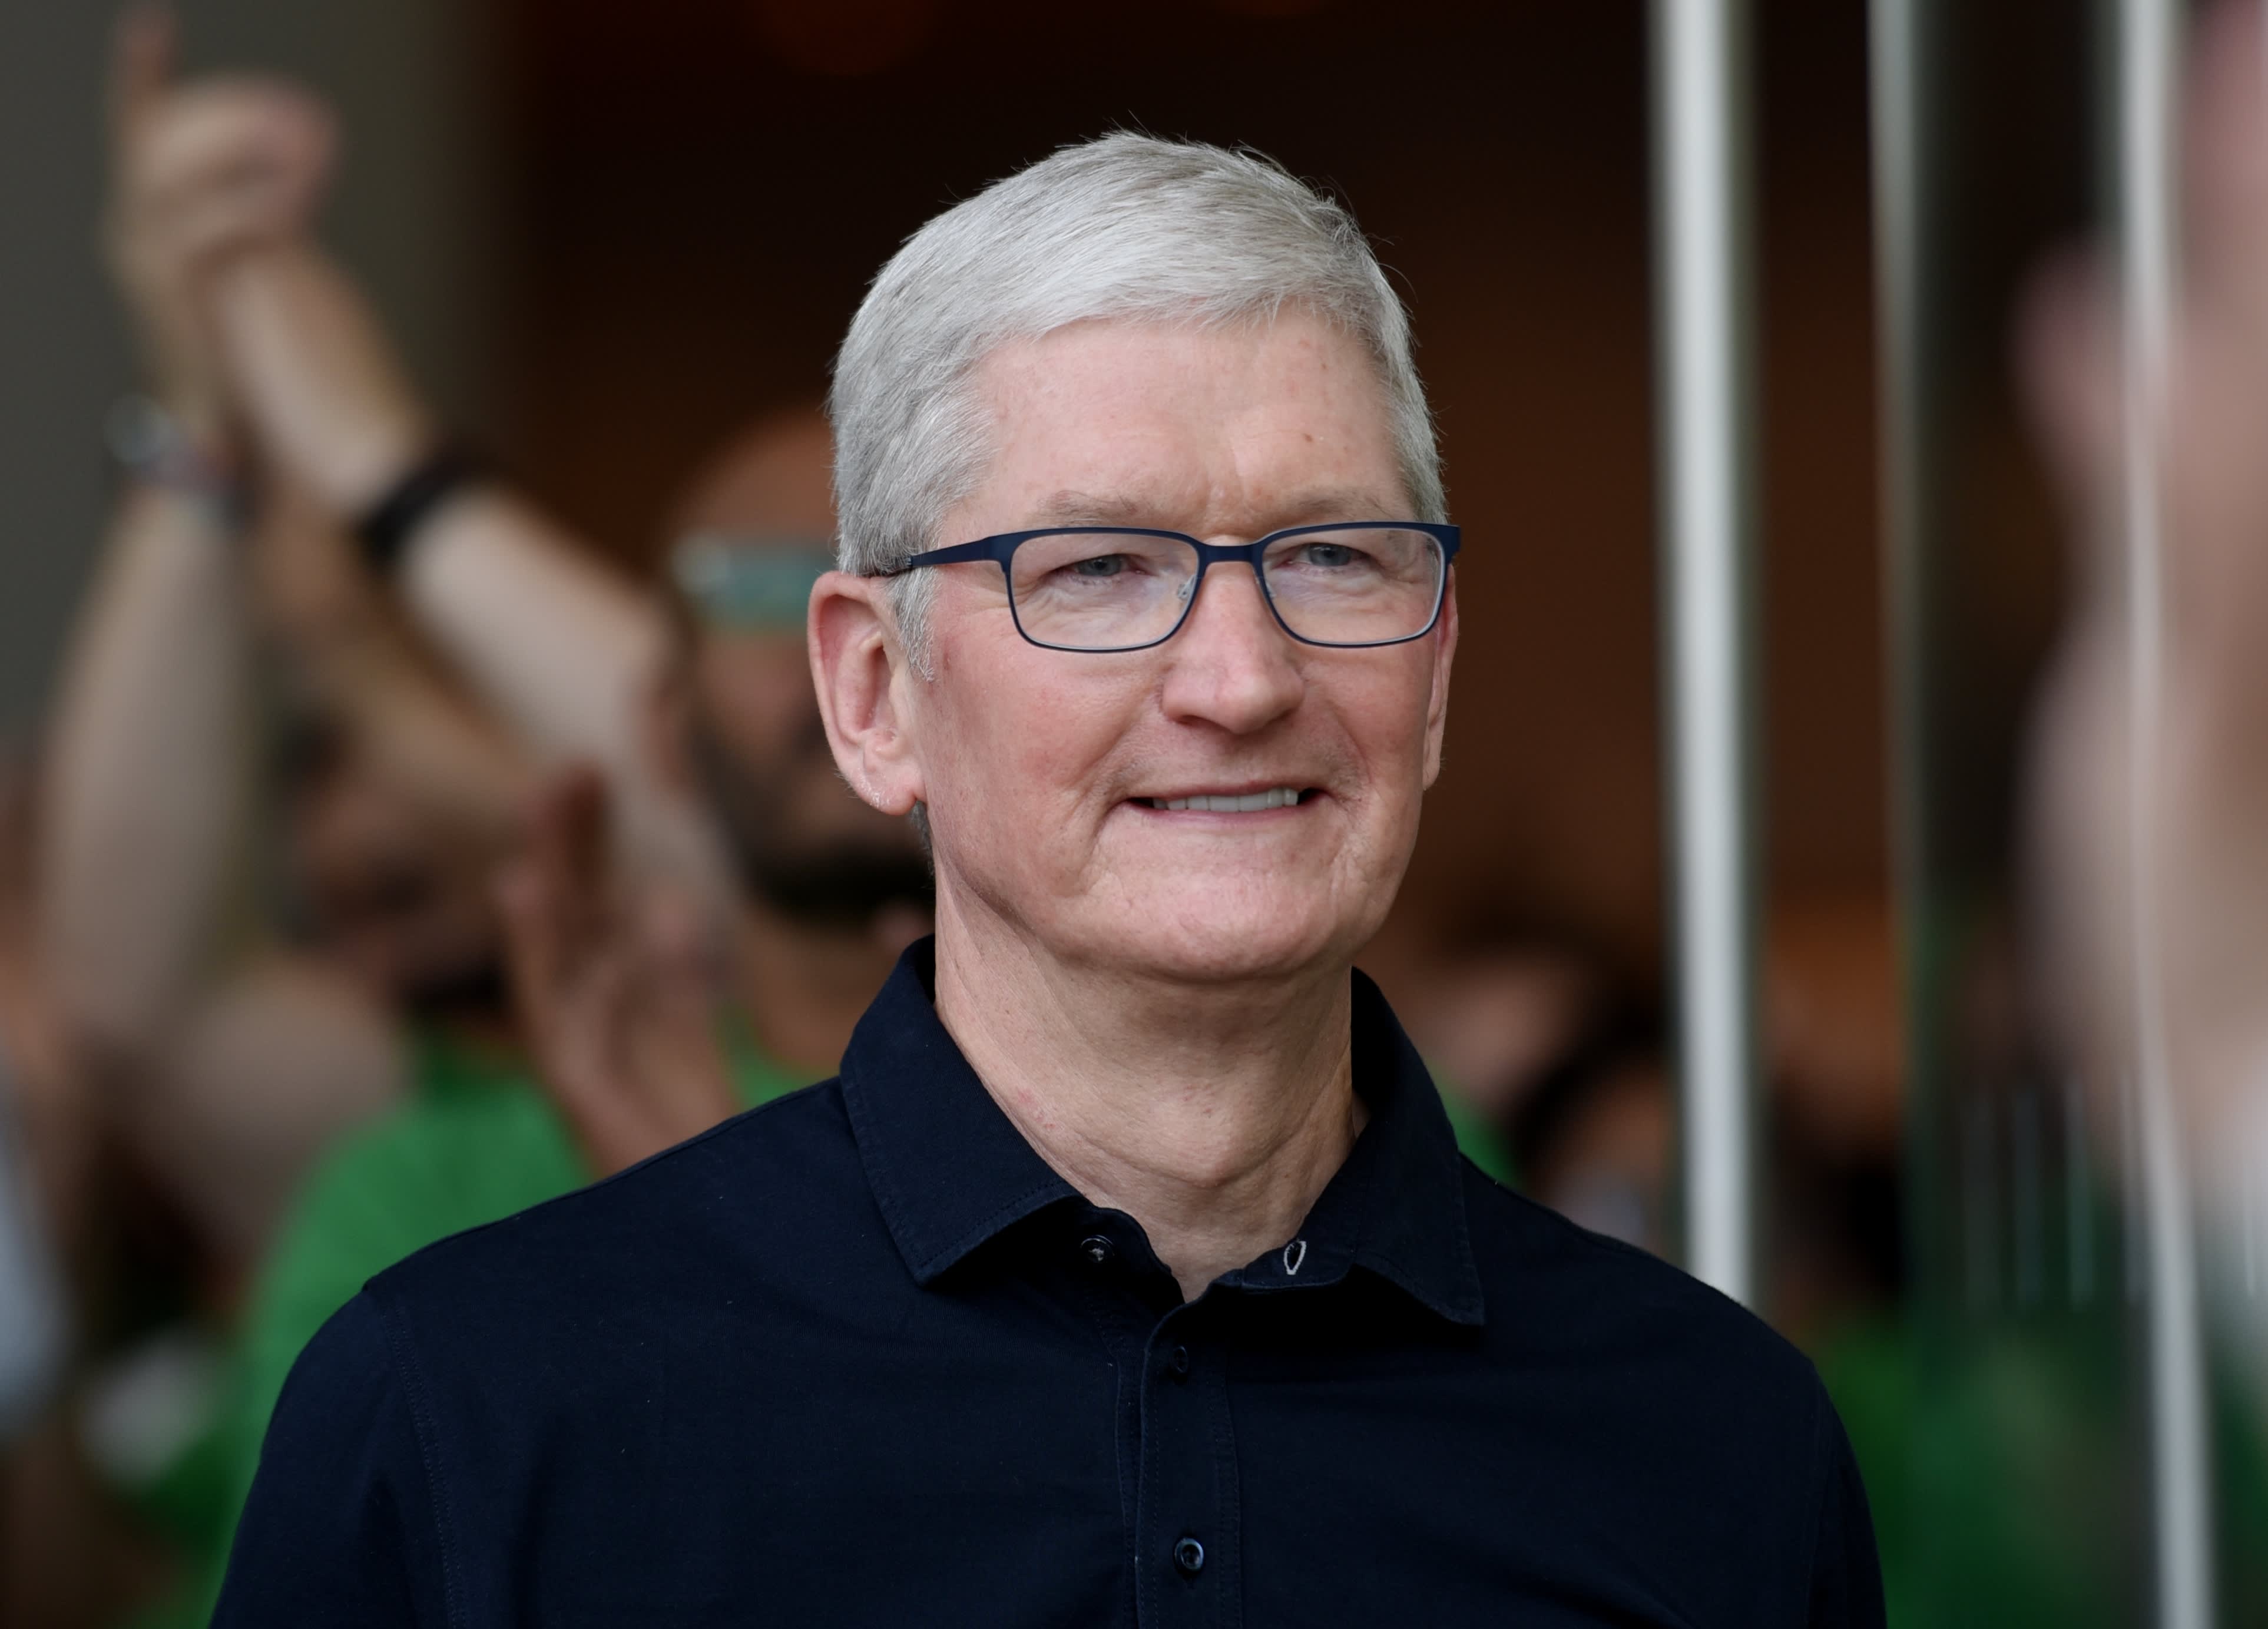 #CEO Tim Cook says layoffs are a ‘last resort’ and not something Apple is considering right now  #Usa #Miami #Nyc #Houston #Uk #Es